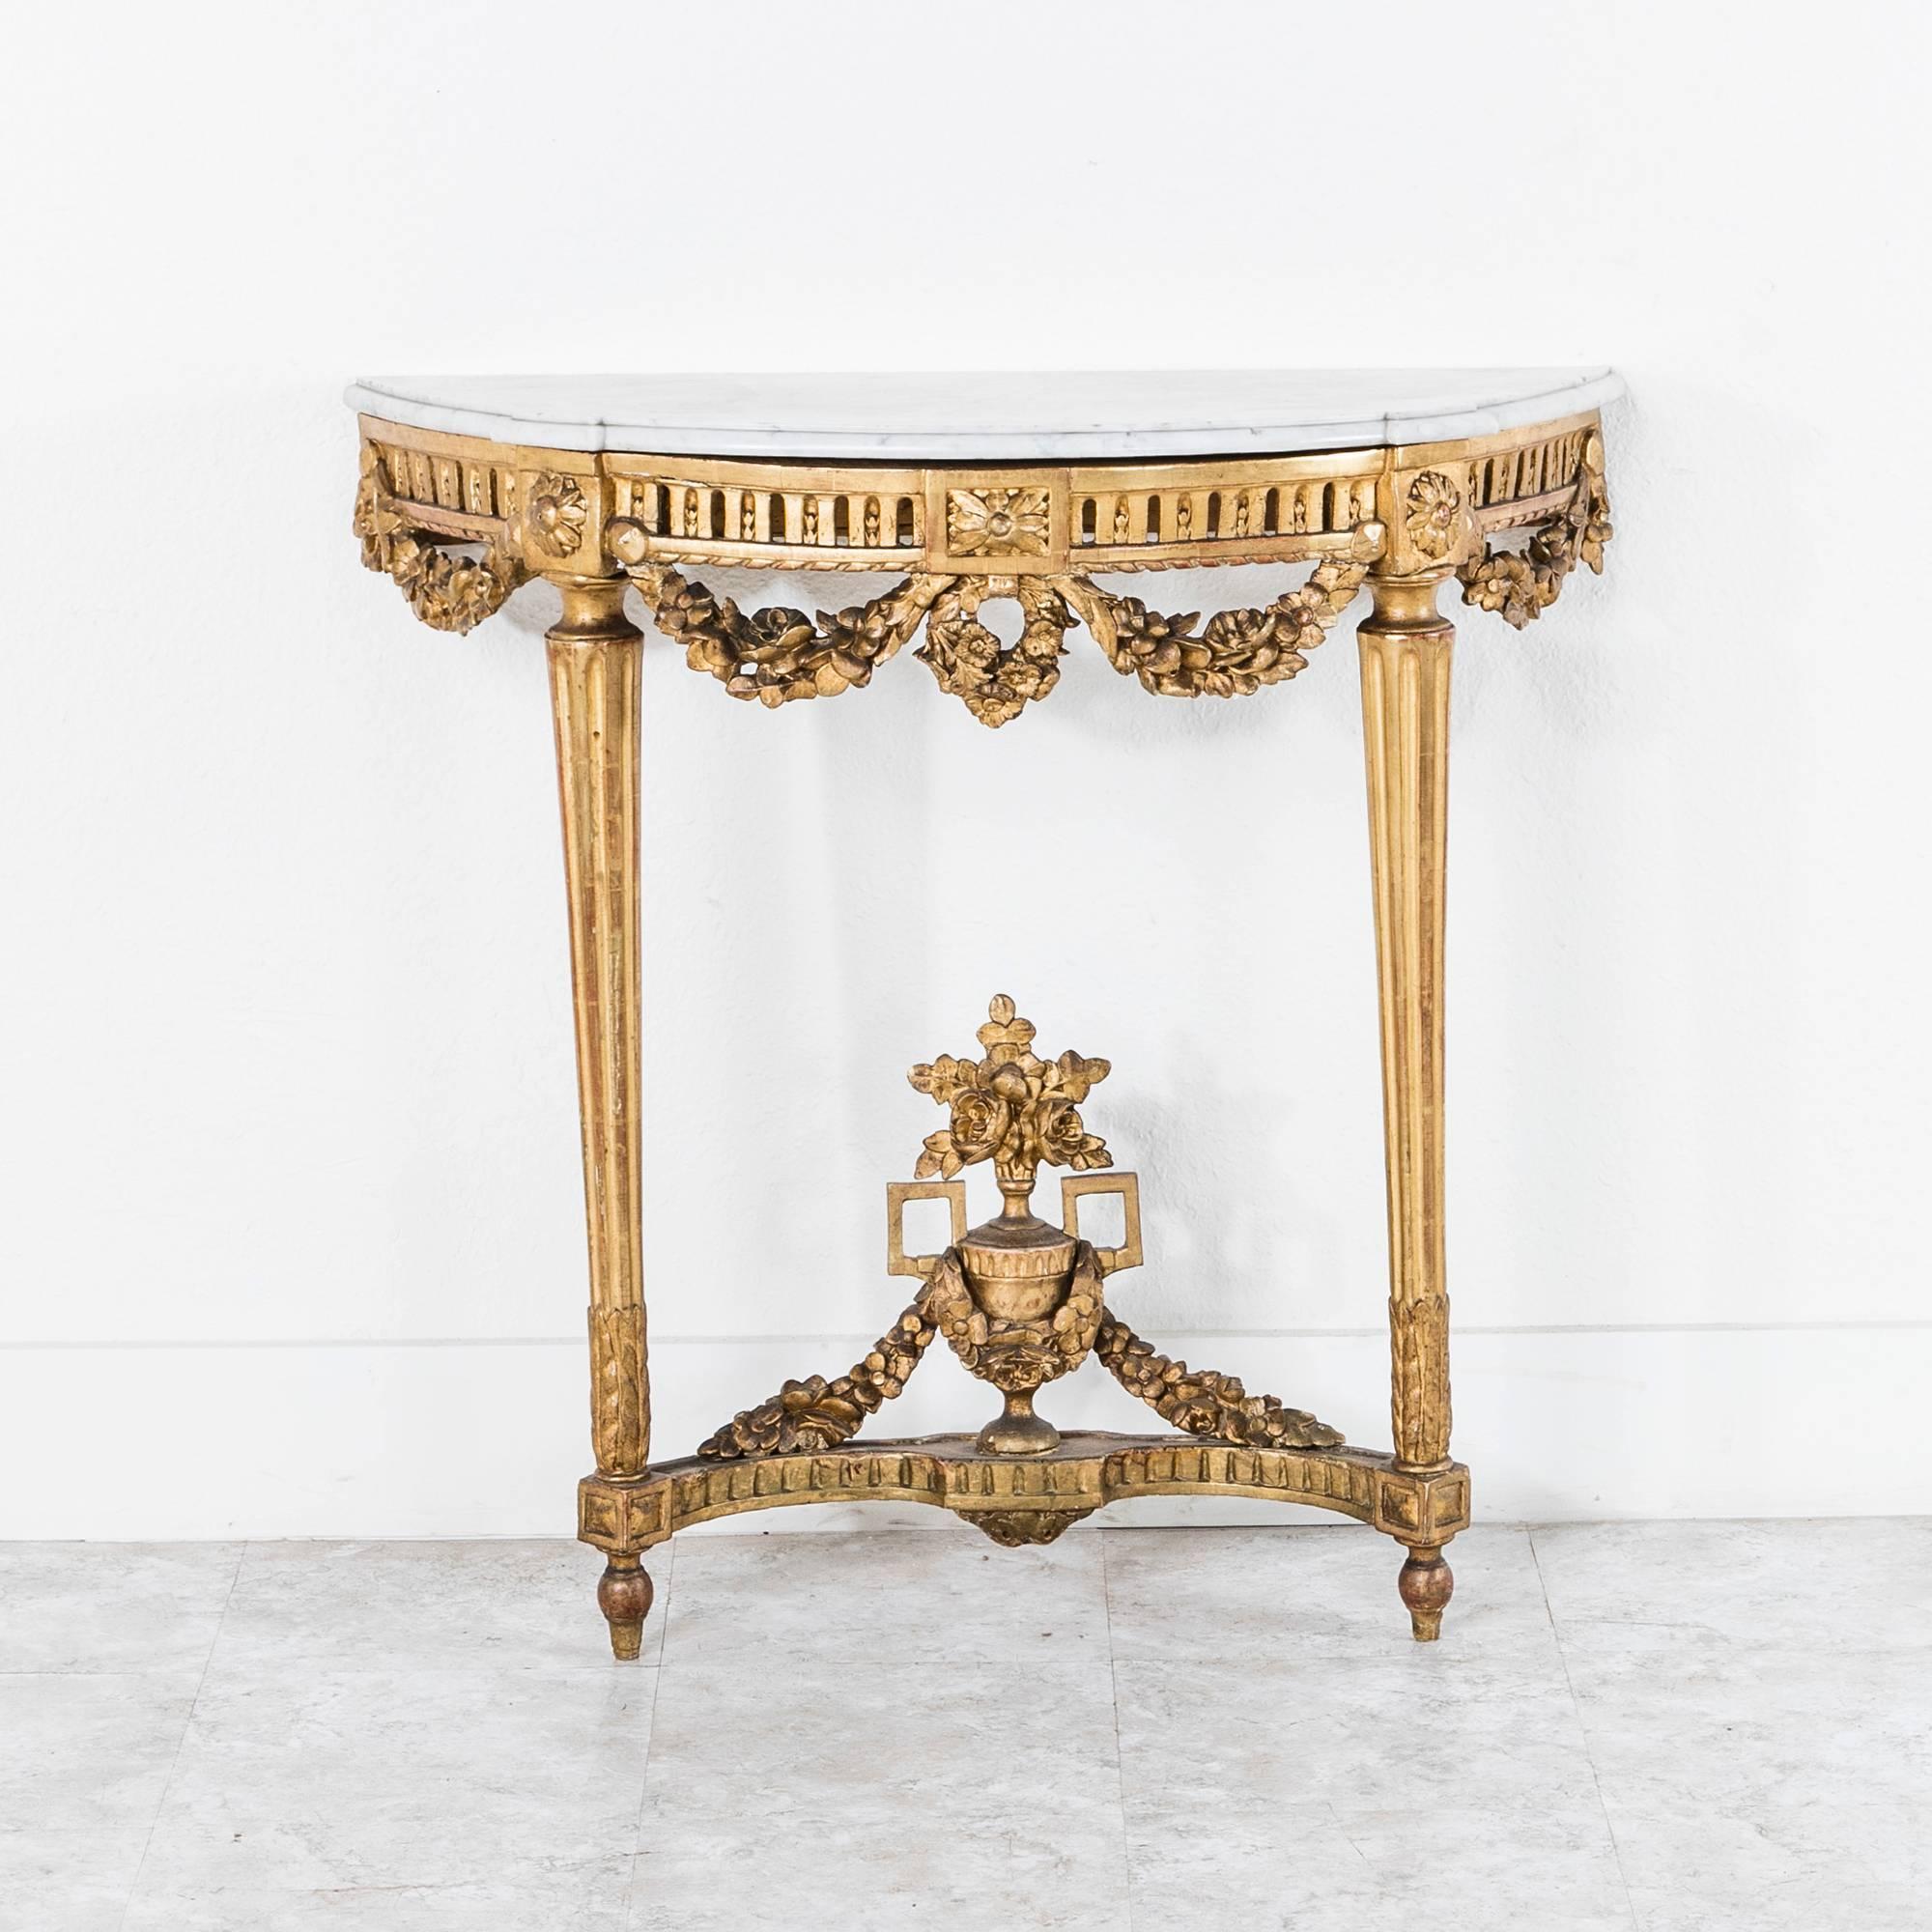 French Fine 18th Century Period Louis XVI Giltwood Console with Garland, White Marble